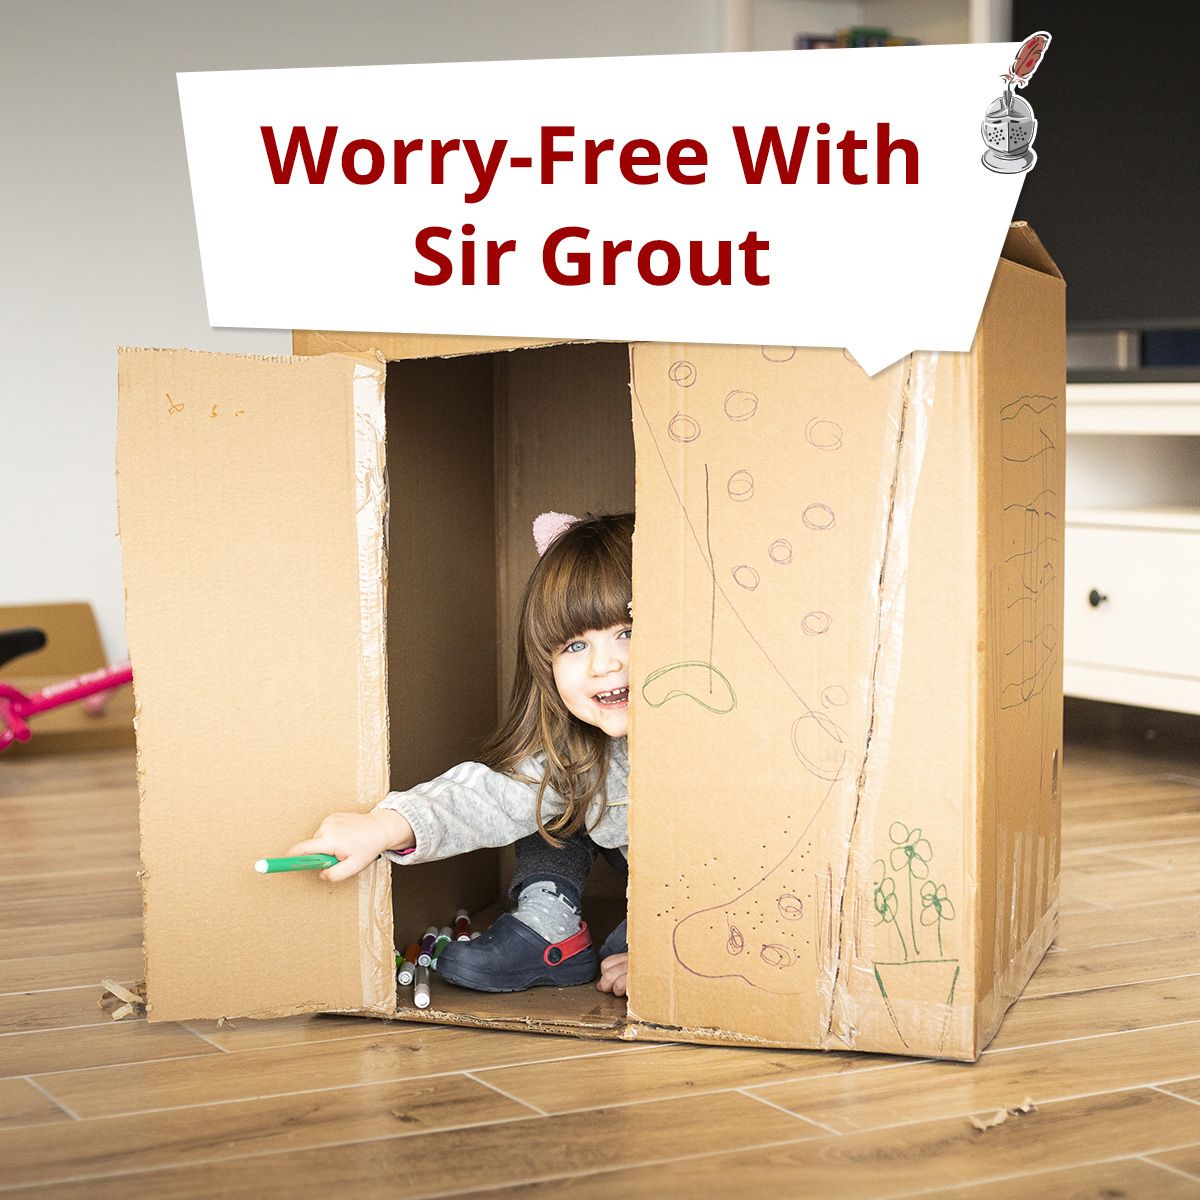 Worry-Free With Sir Grout